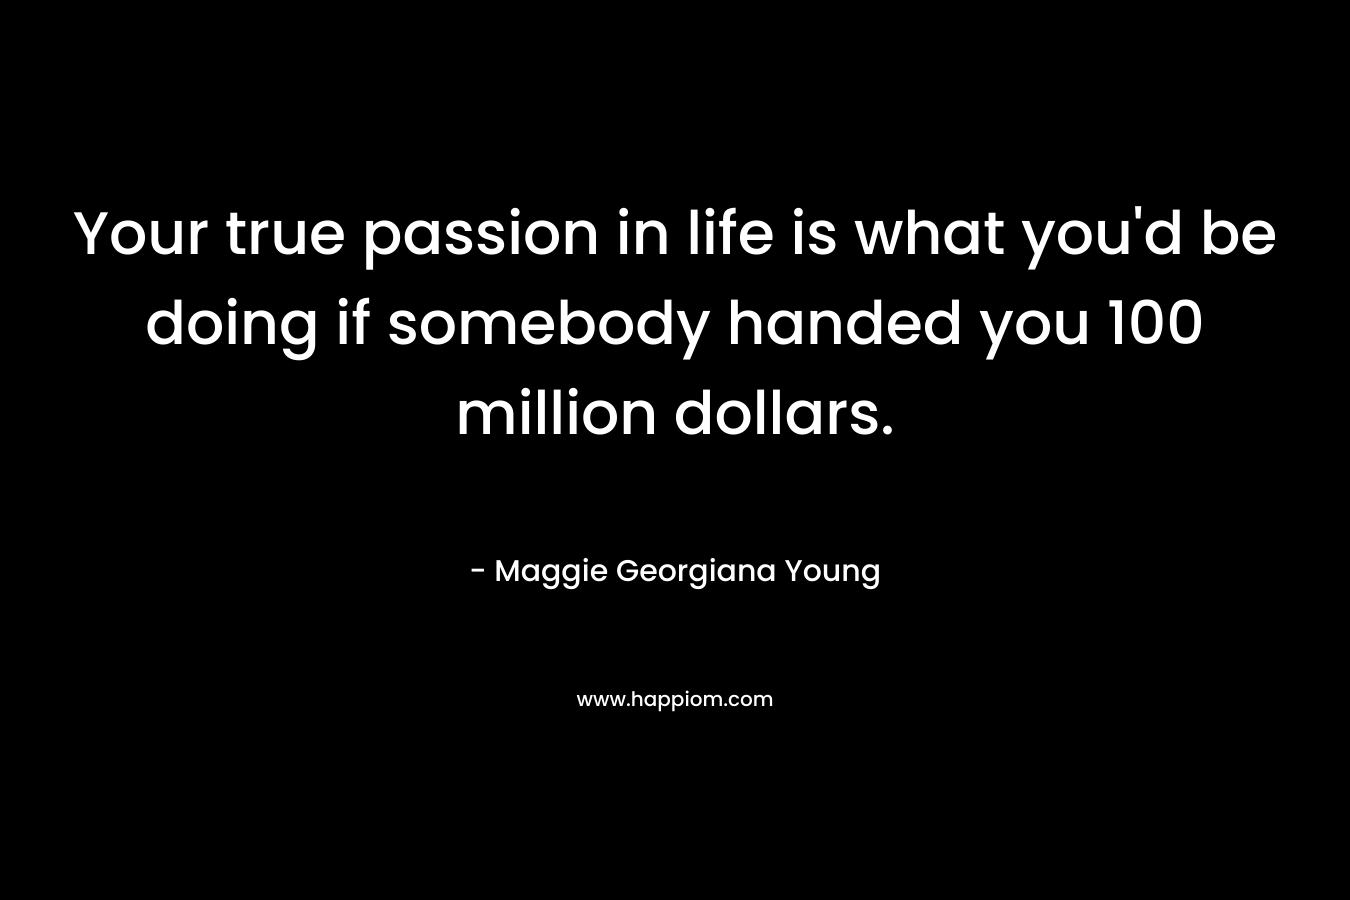 Your true passion in life is what you'd be doing if somebody handed you 100 million dollars.